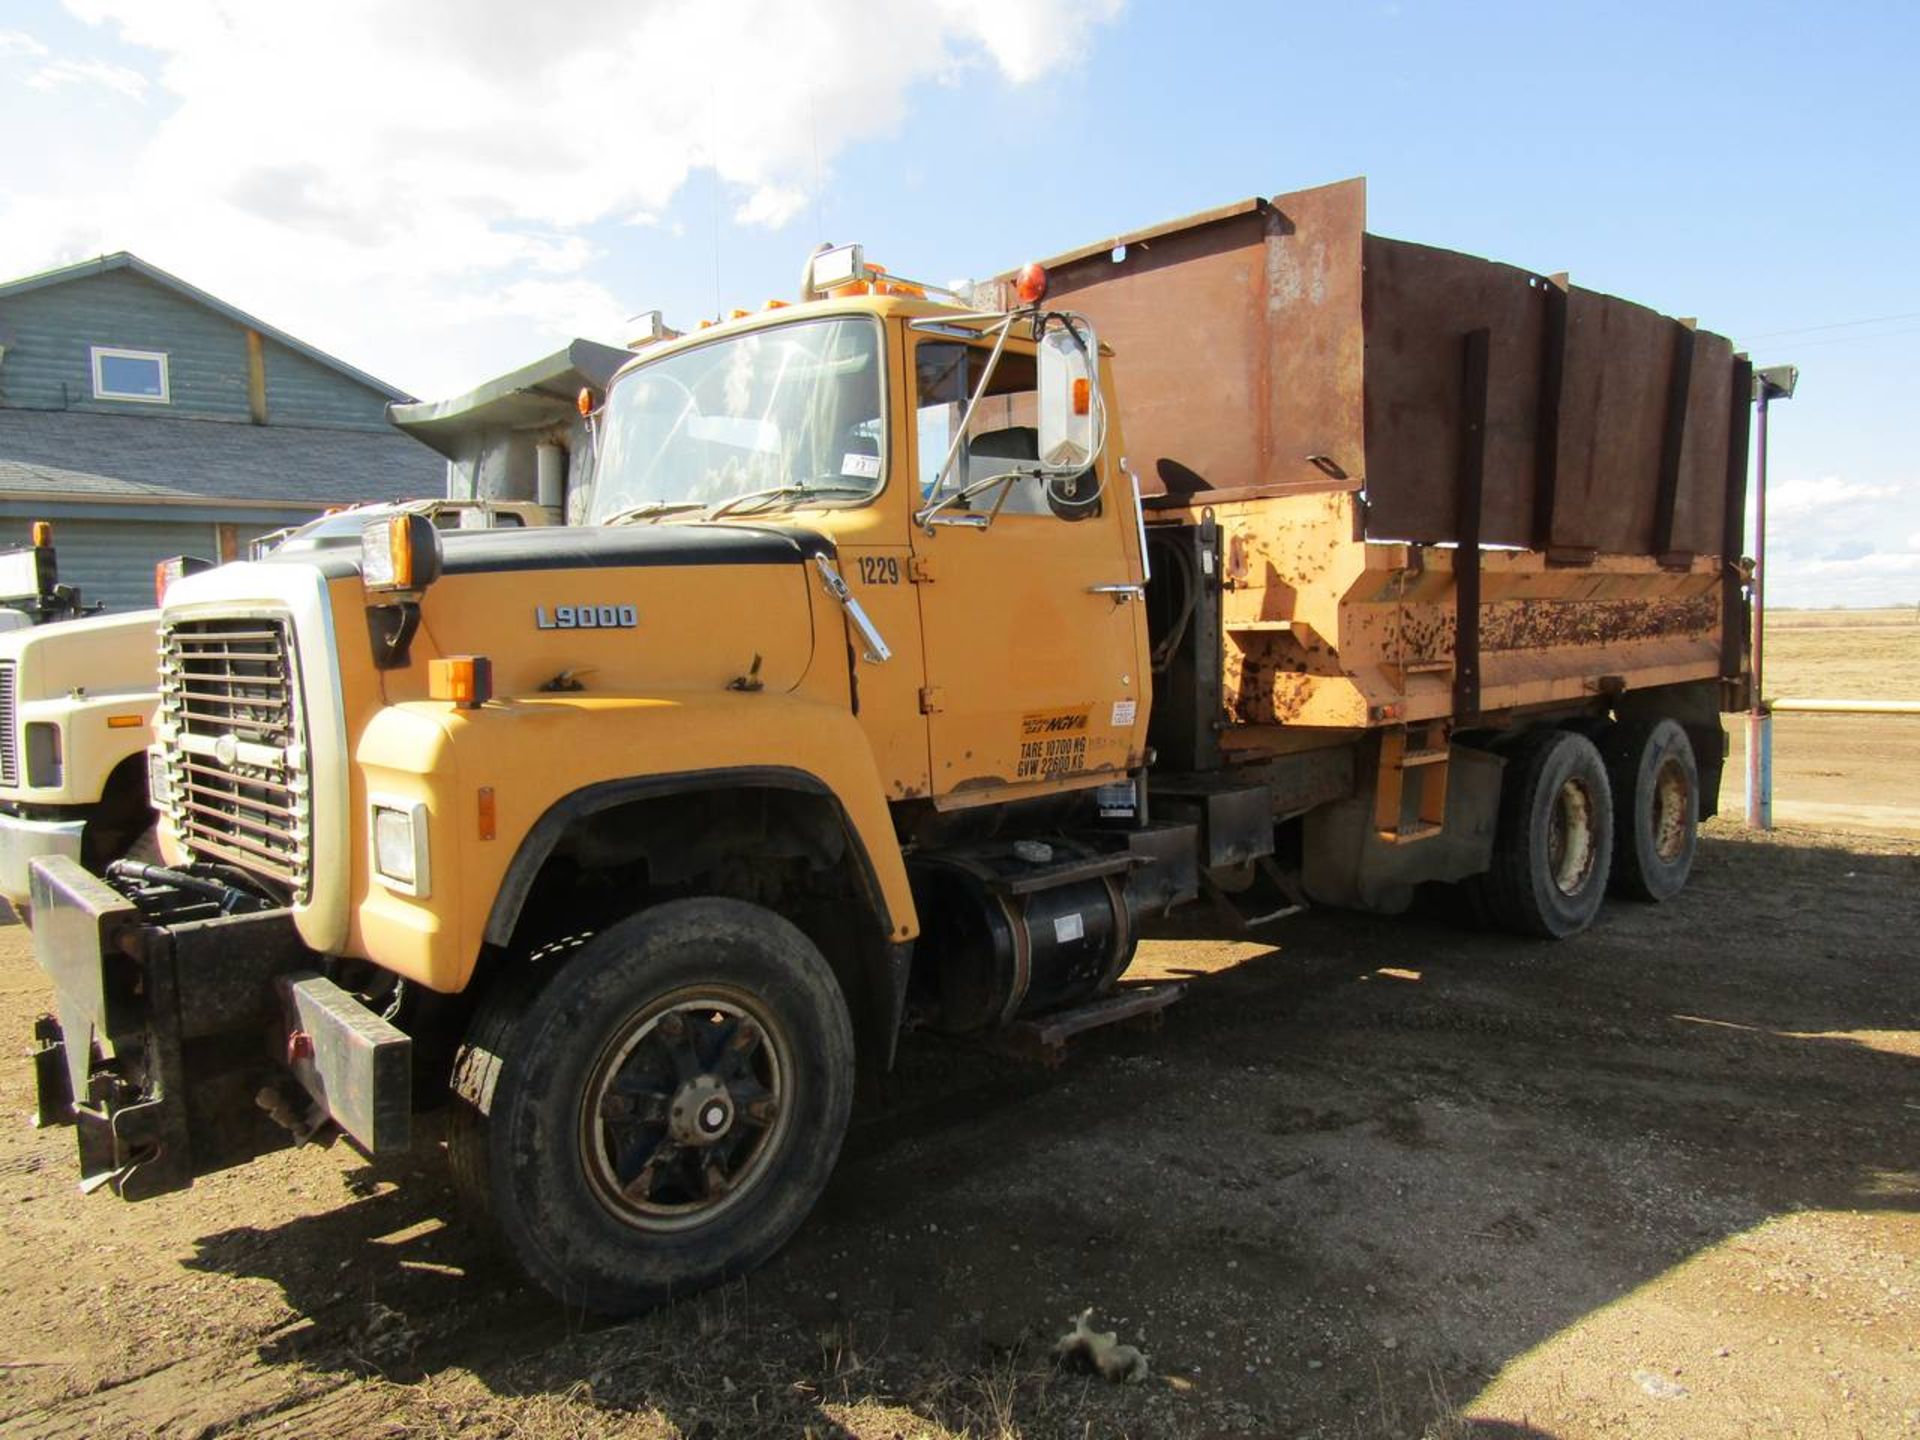 1990 Ford L9000 Dump Truck - Image 3 of 5